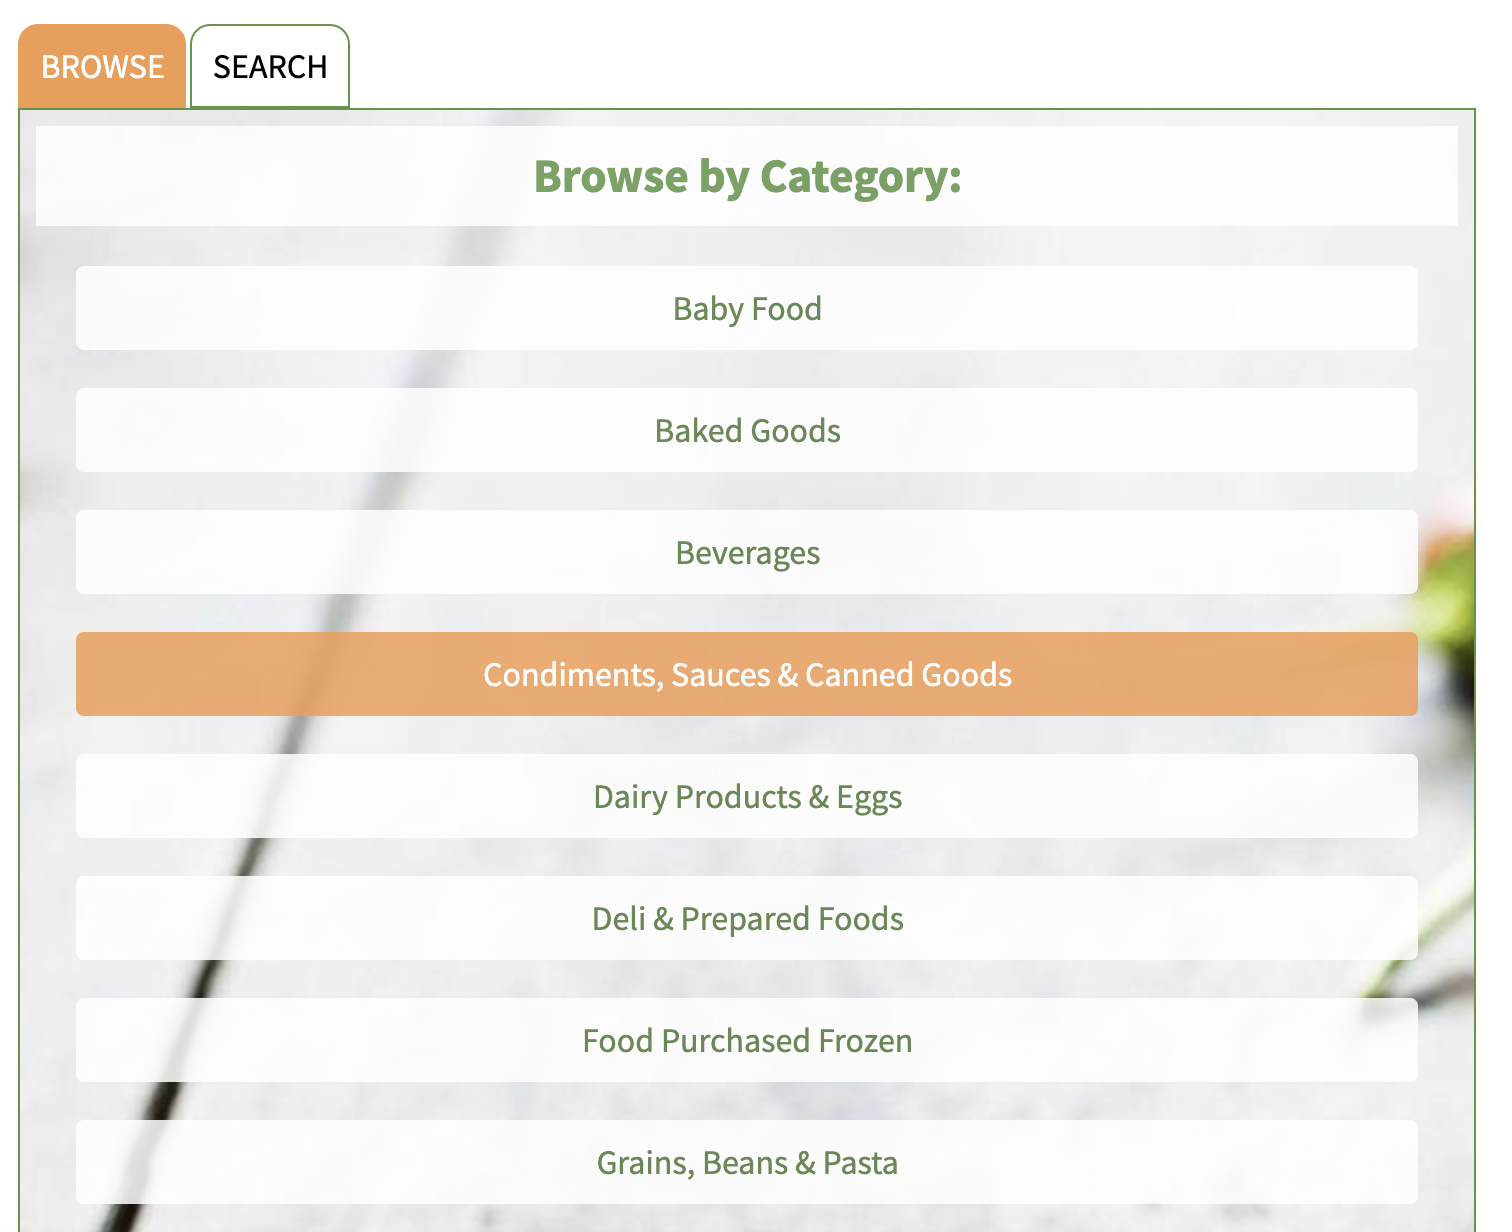 "browse by category" feature in FoodKeeper